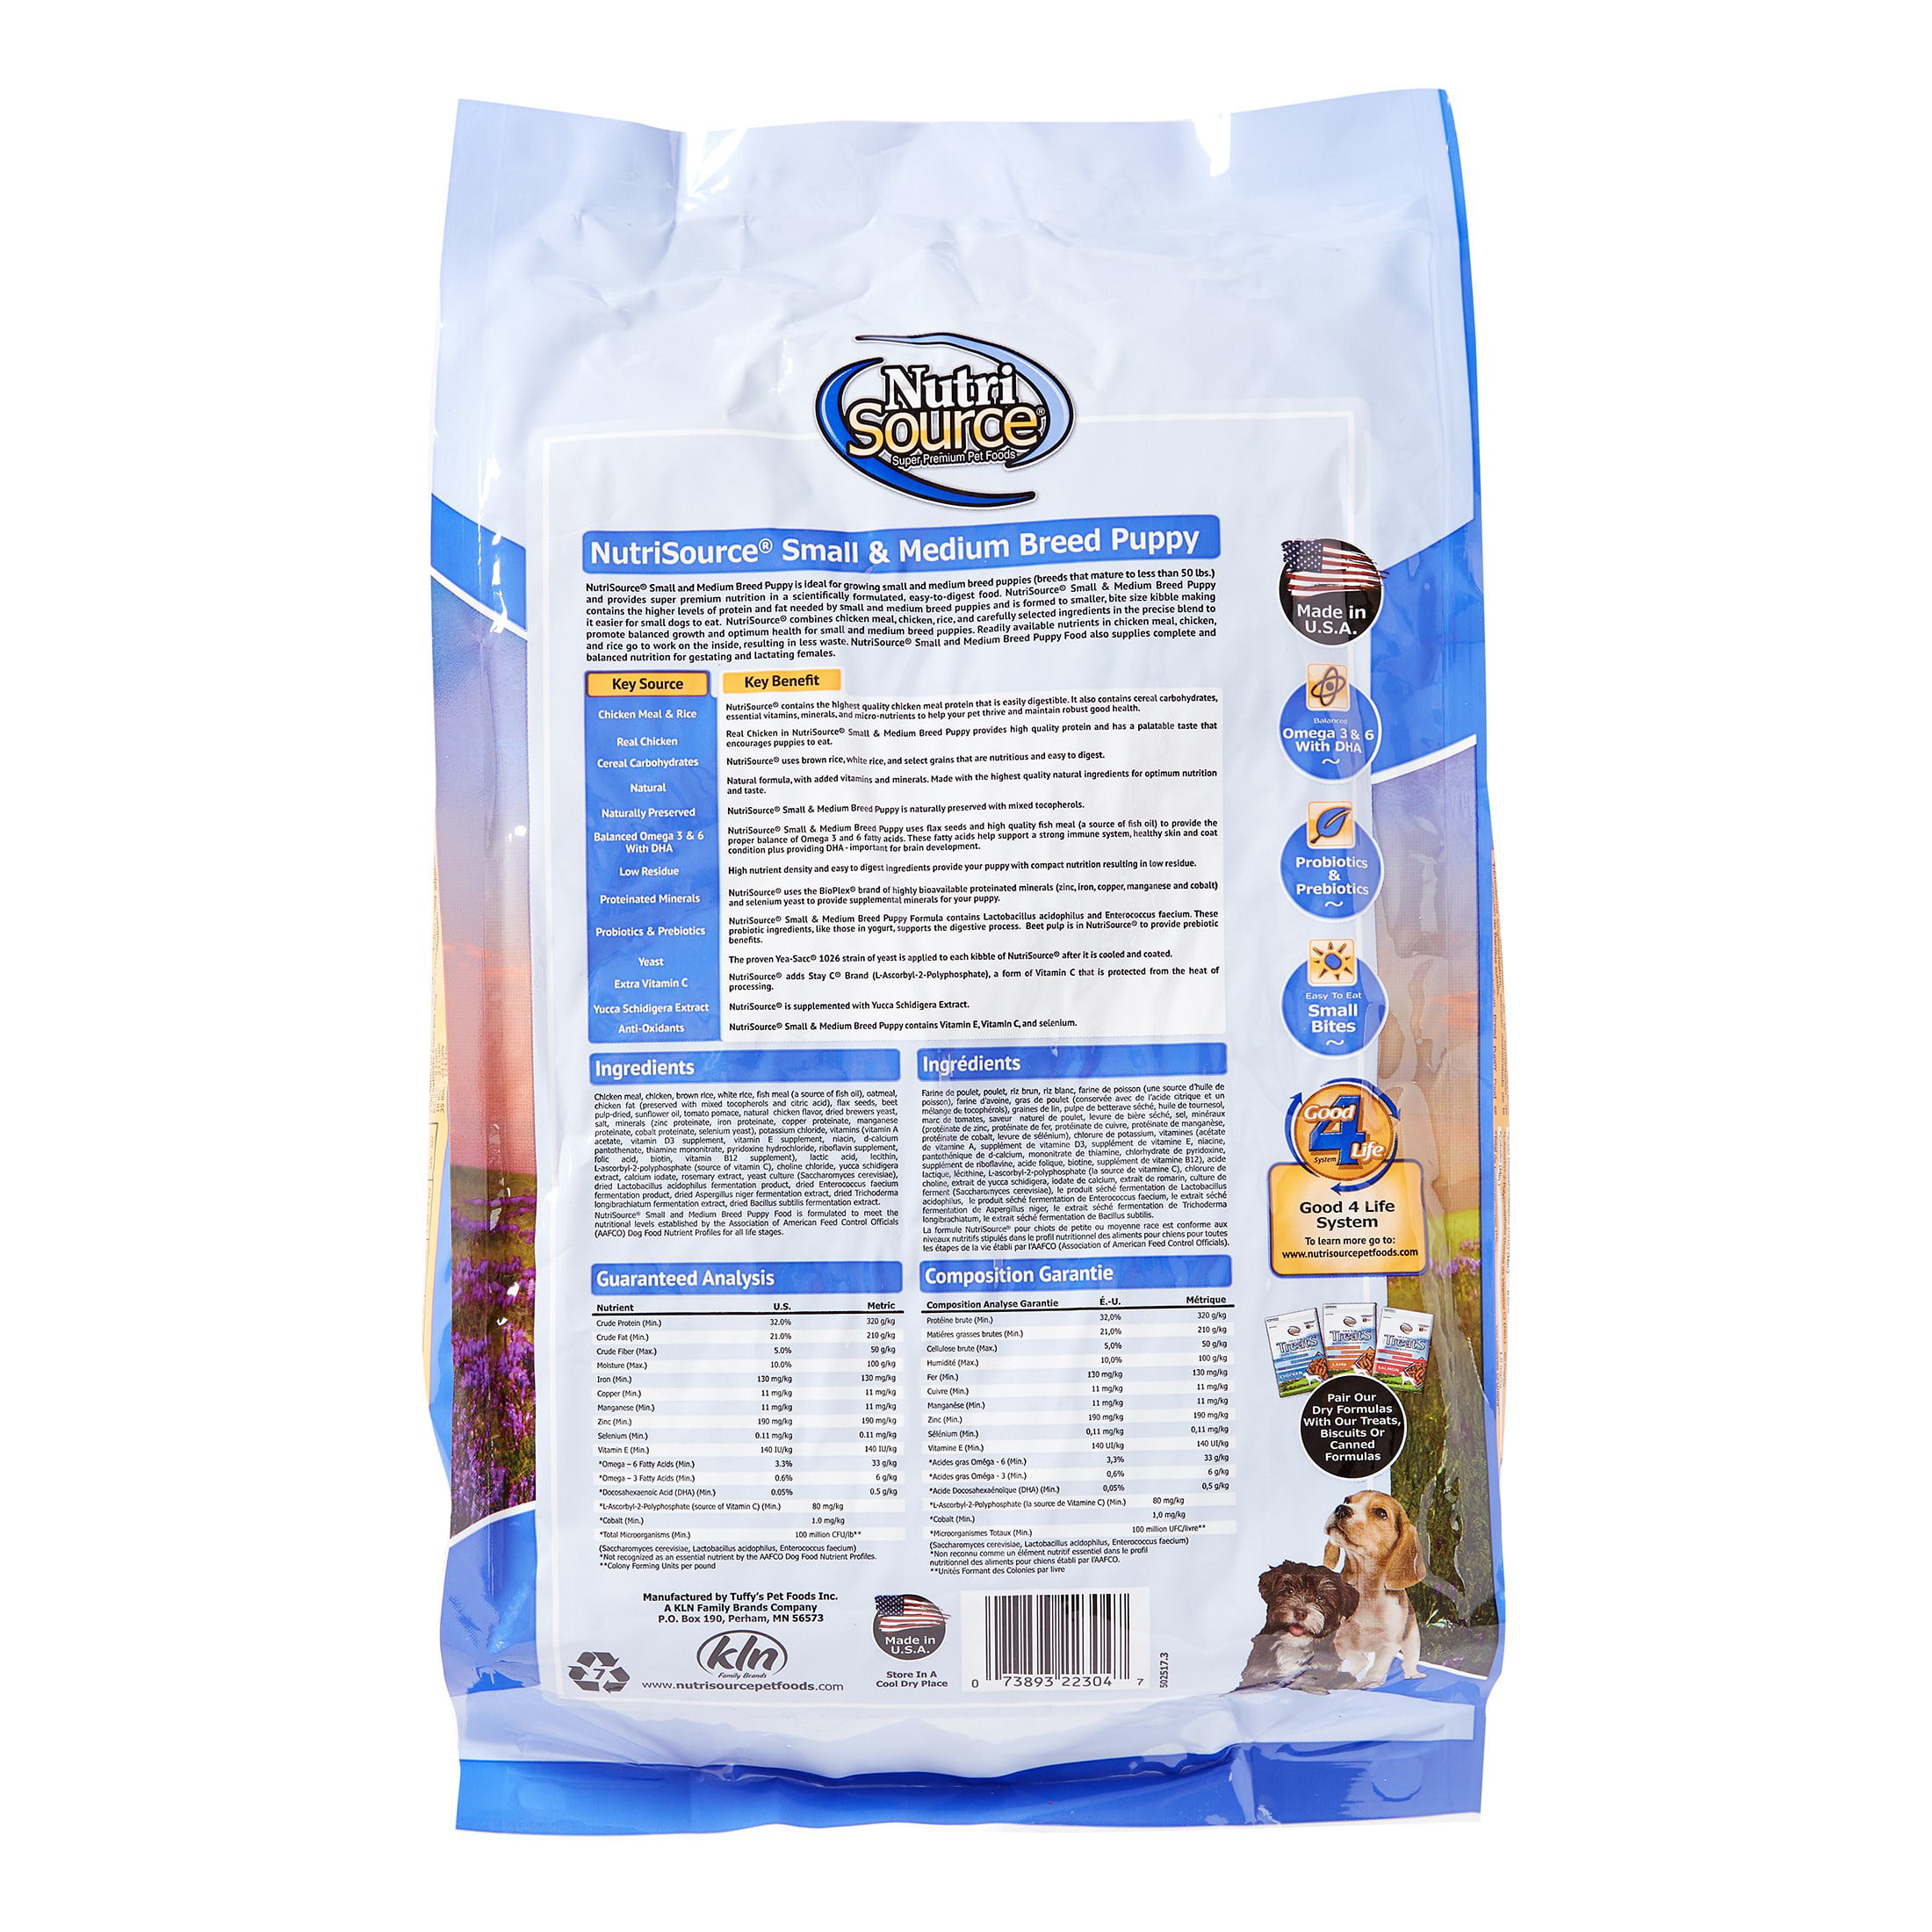 Nutrisource Large Breed Puppy Feeding Guide - Puppy And Pets